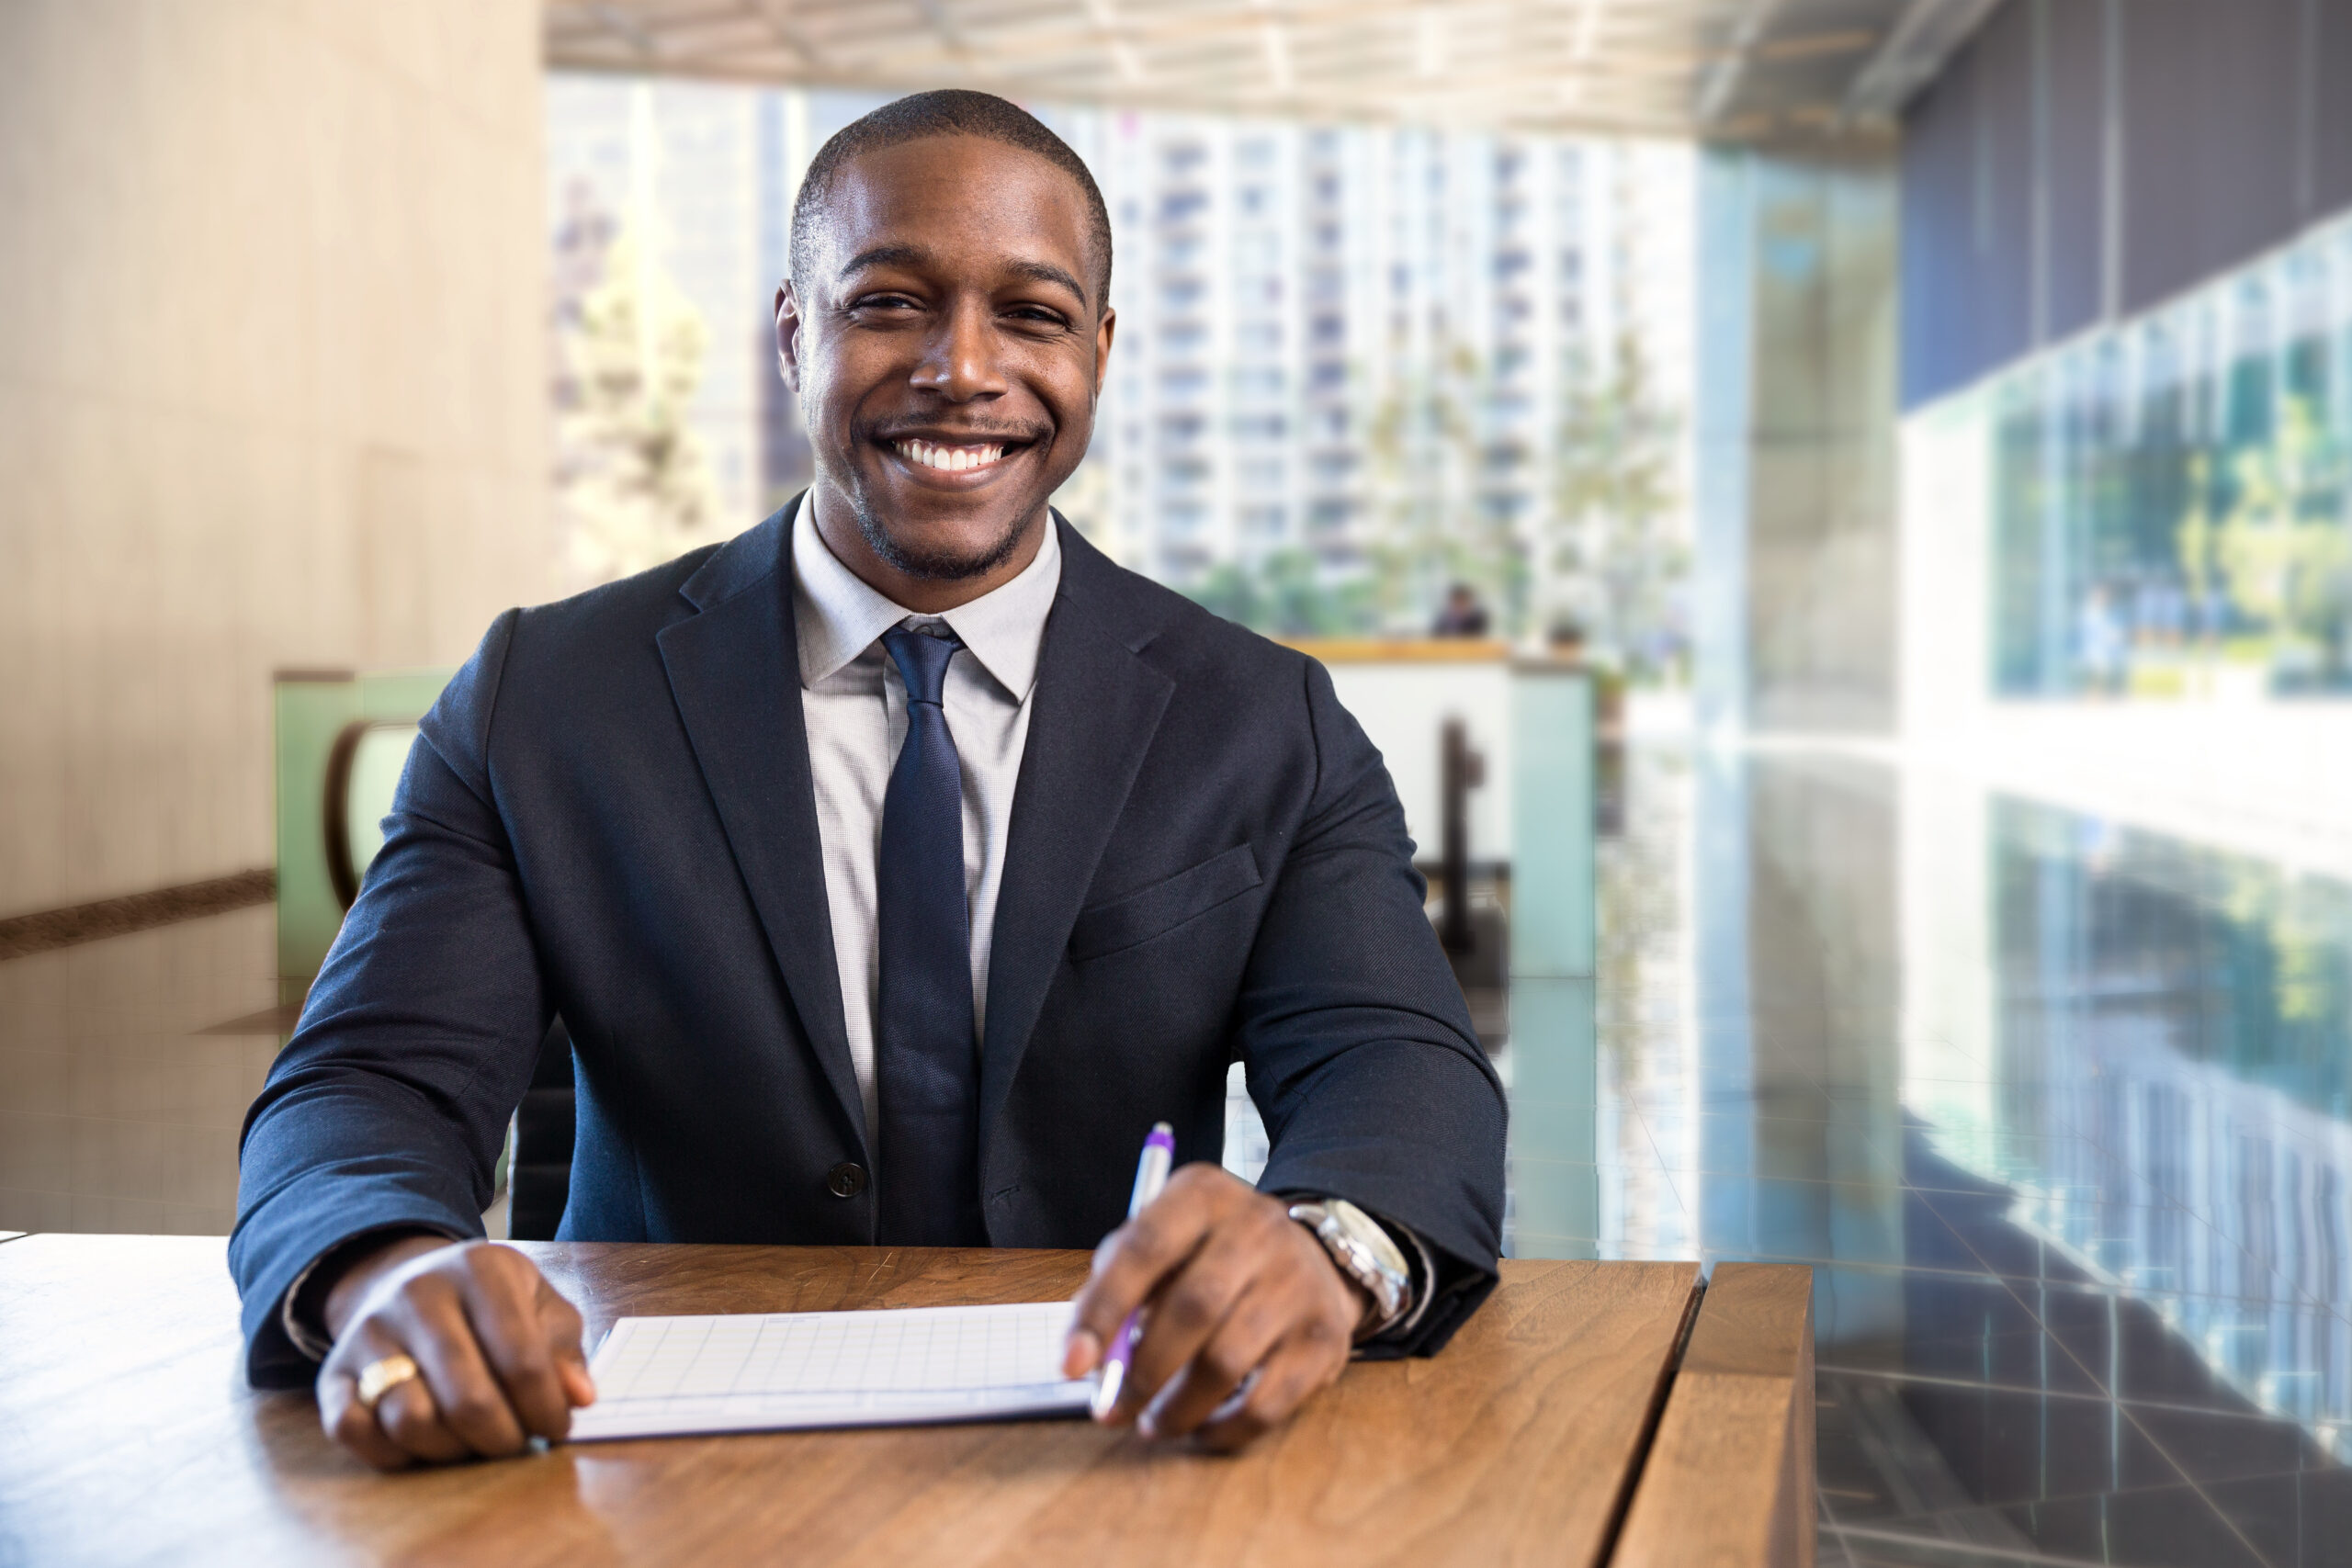 Charming warm friendly smile from stylish financial sales manager sitting at desk with paperwork